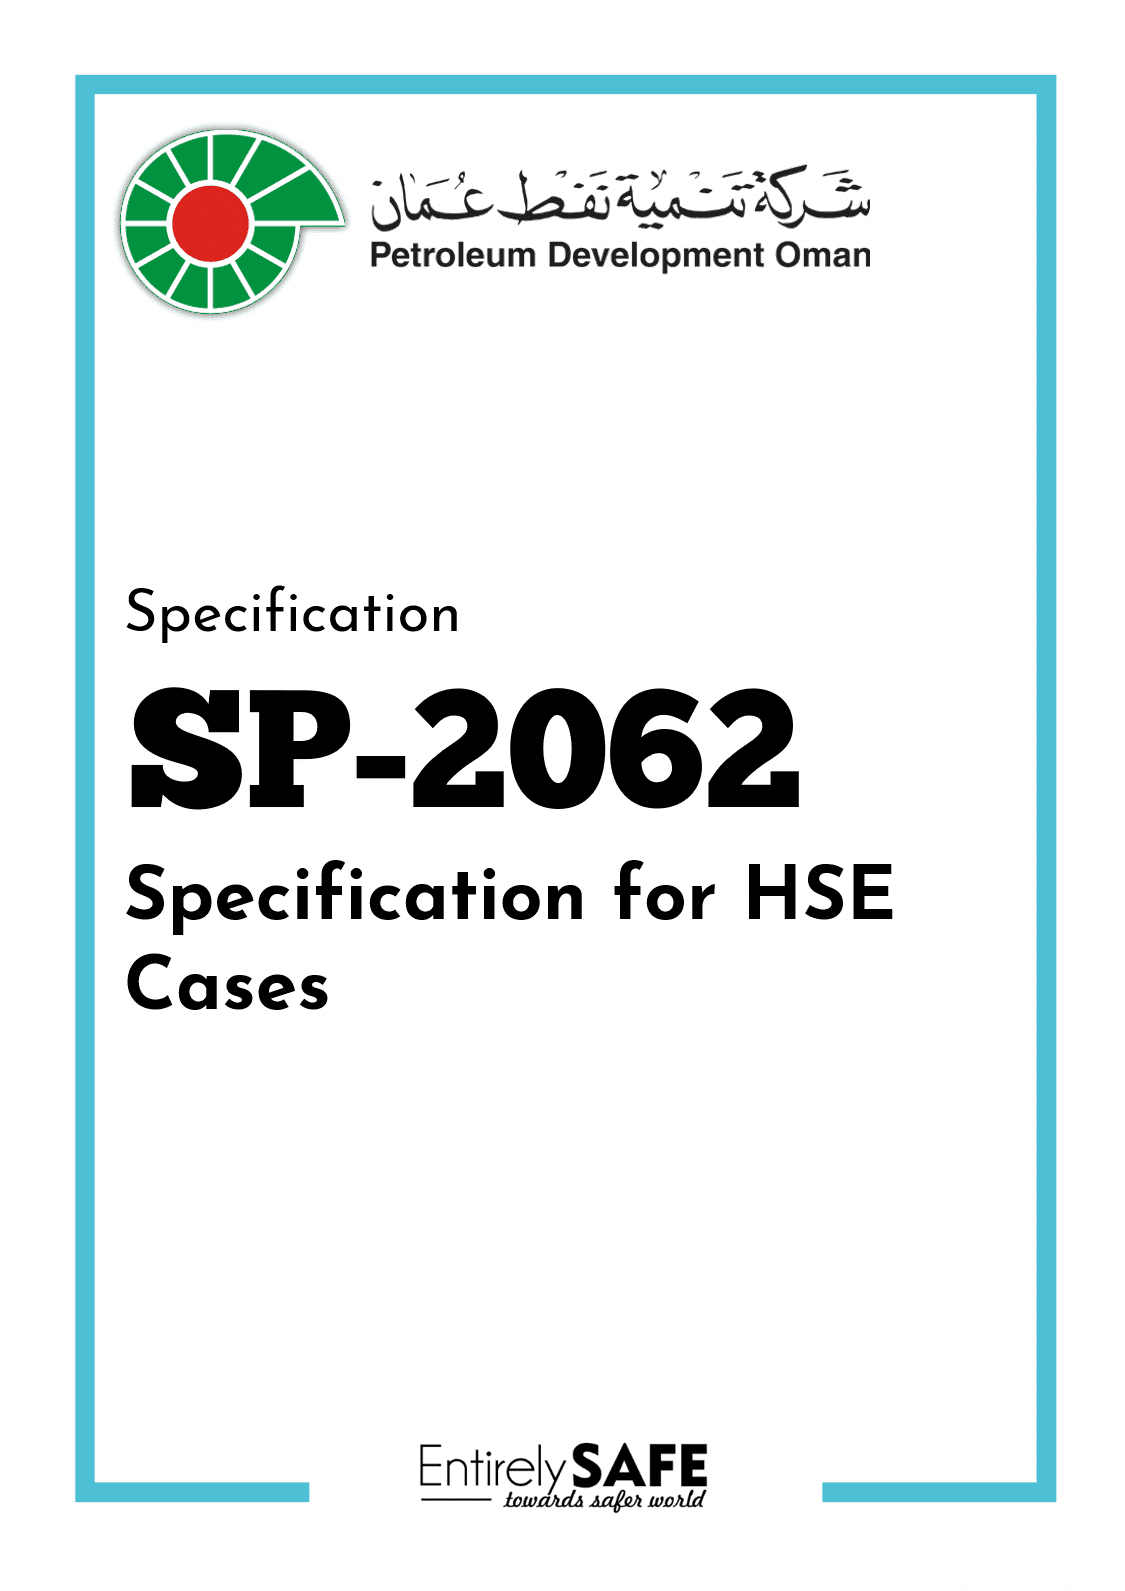 256-SP-2062-Specification-for-HSE-Cases-PDO-download-pdf